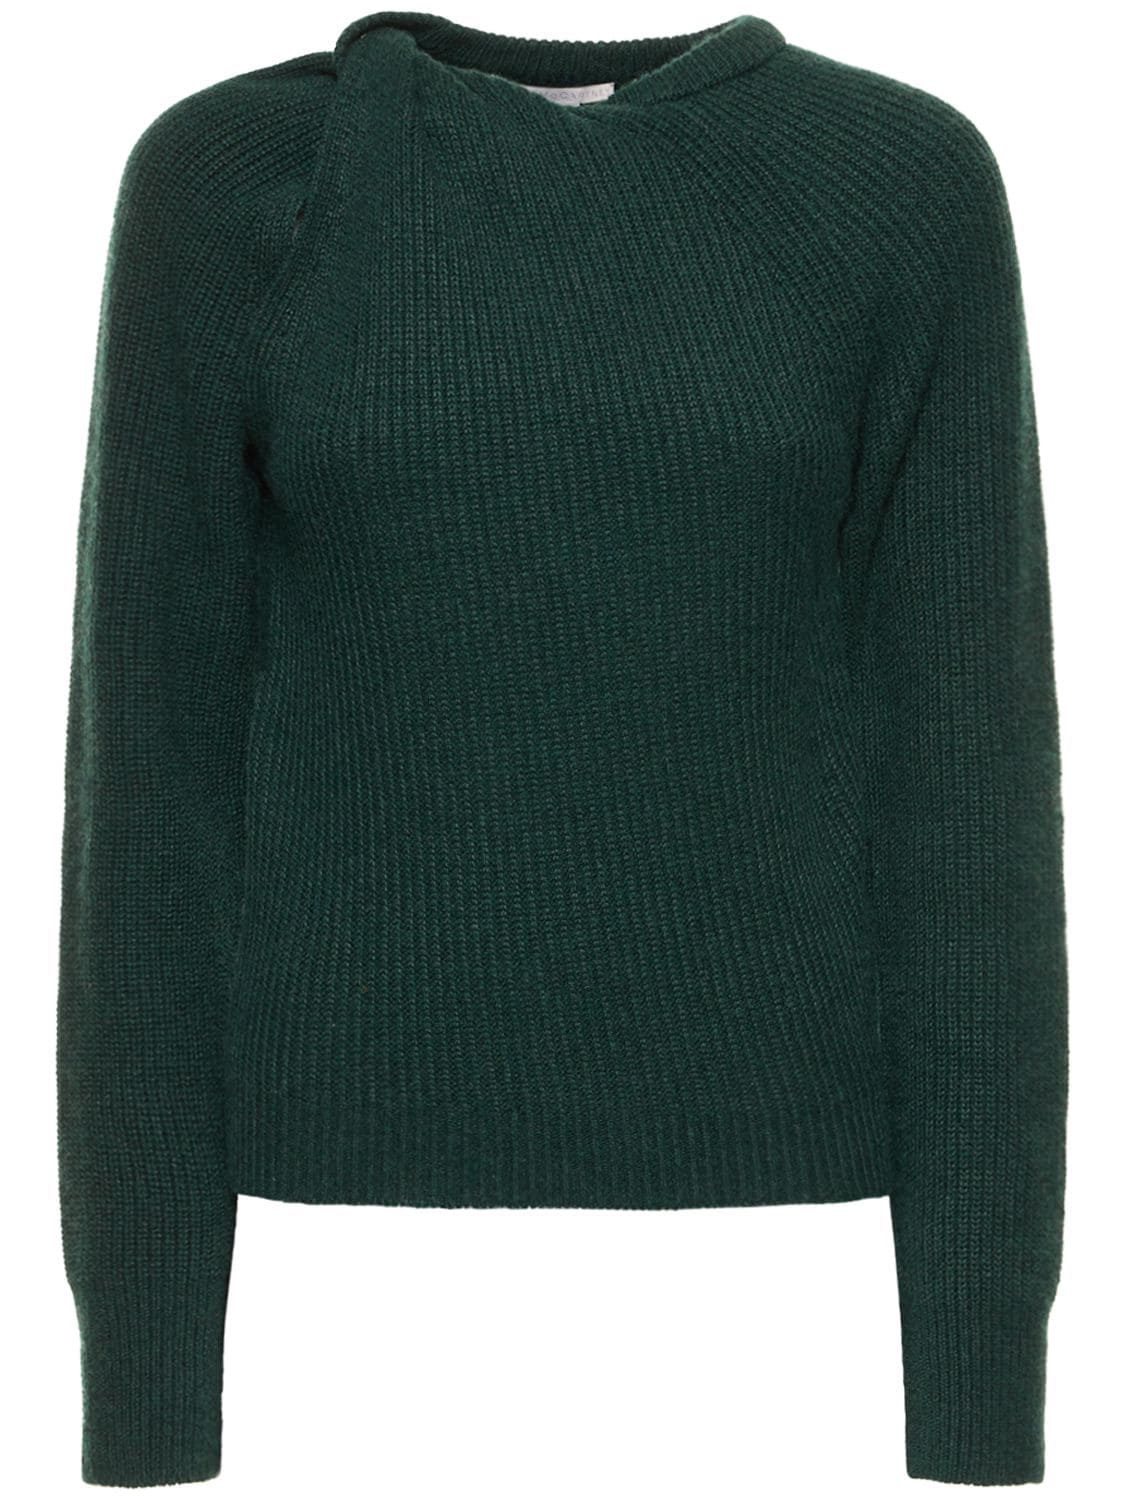 Image of Cashmere Rib Knit Twisted Sweater